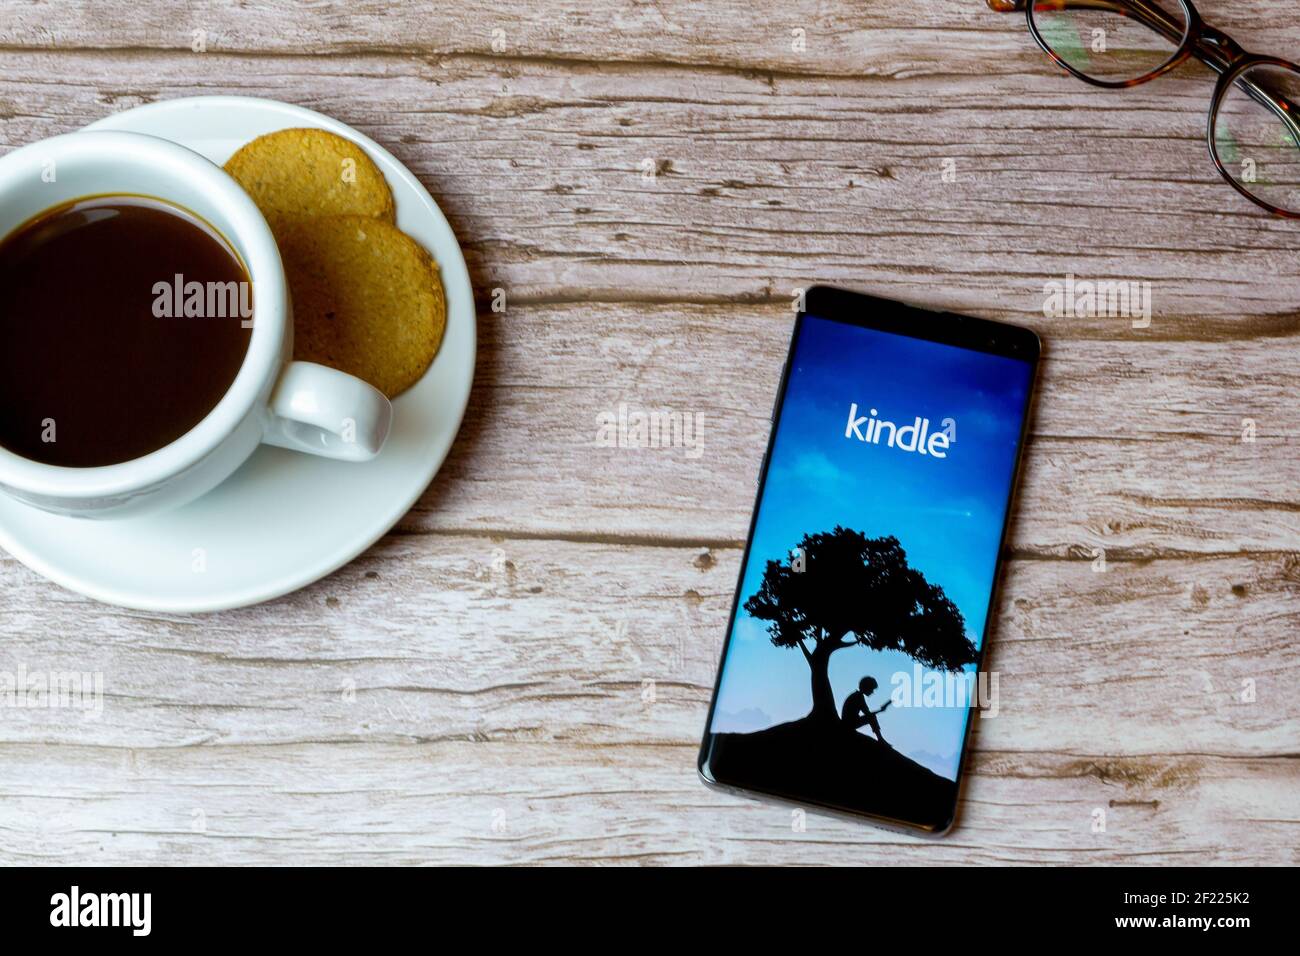 A Mobile phone or cell phone laid on a wooden table with the Amazon Kindle app opening also a coffee and glasses Stock Photo